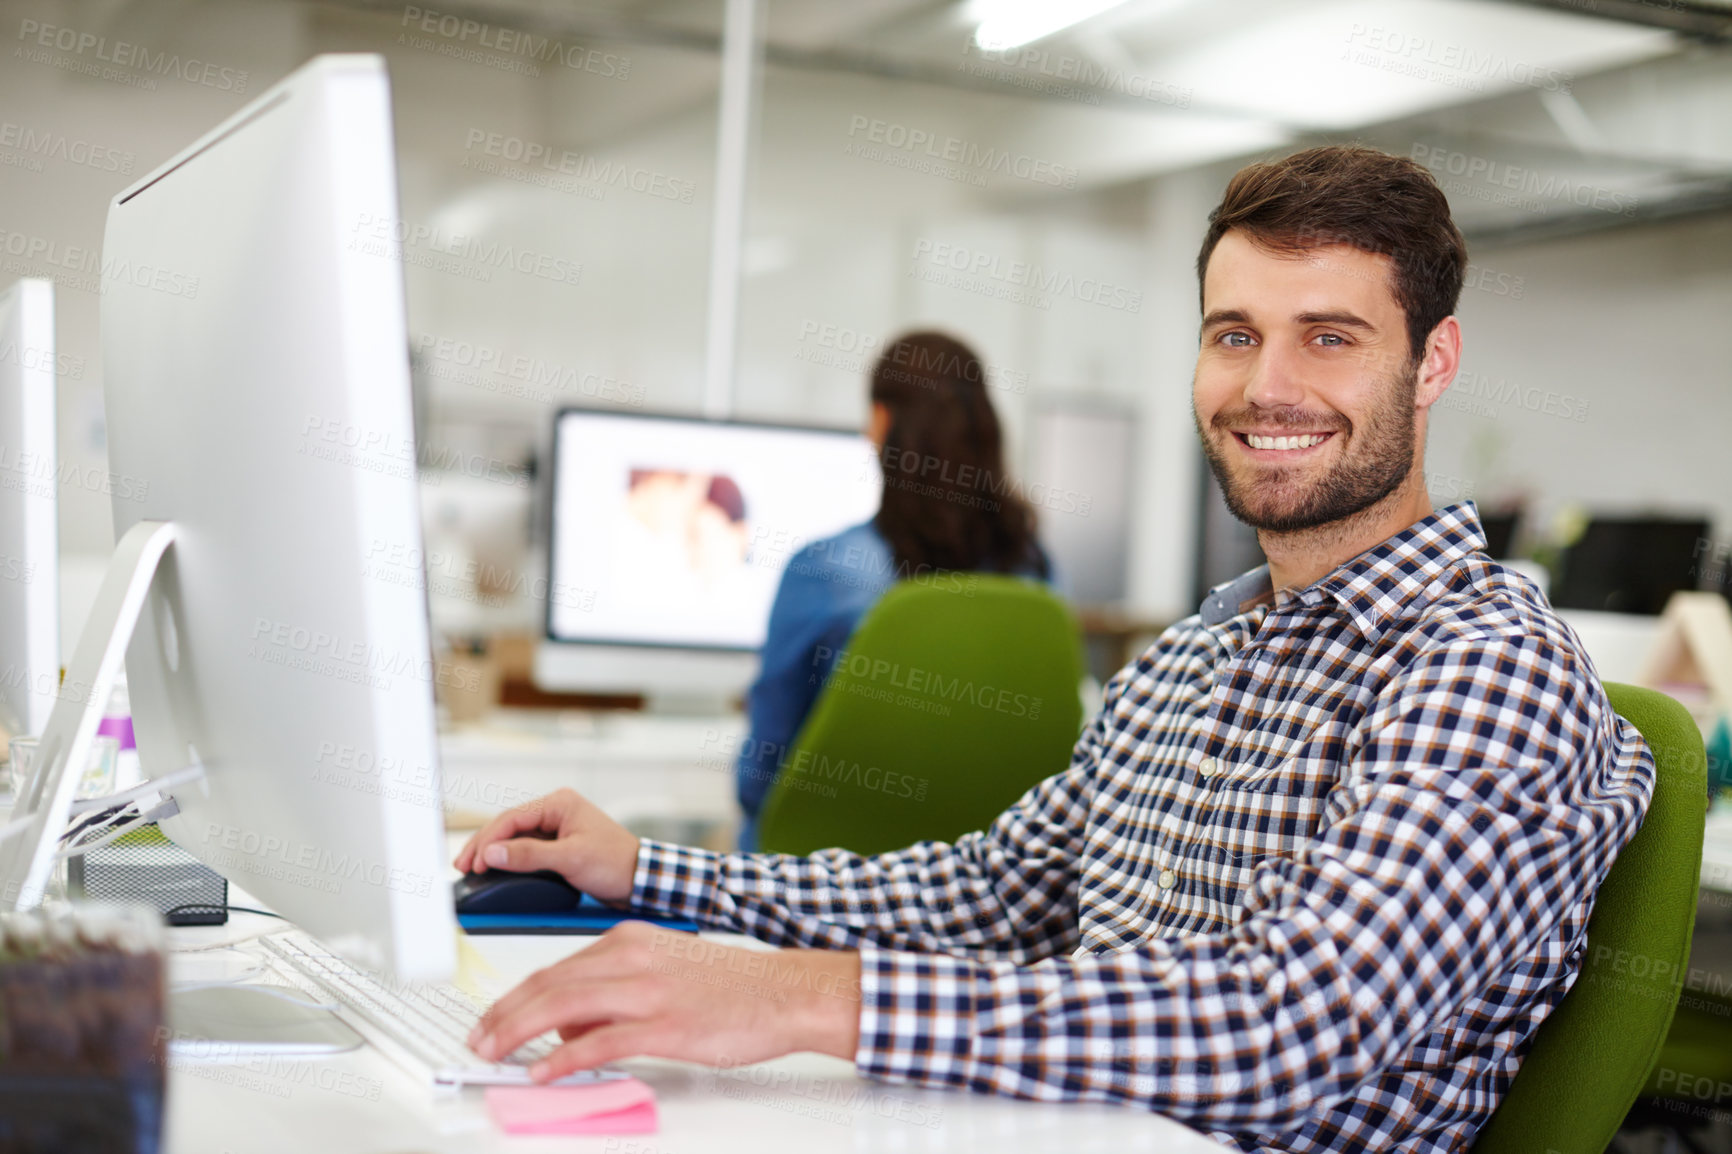 Buy stock photo Portrait of a handsome young designer sitting at his desk with a colleague in the background